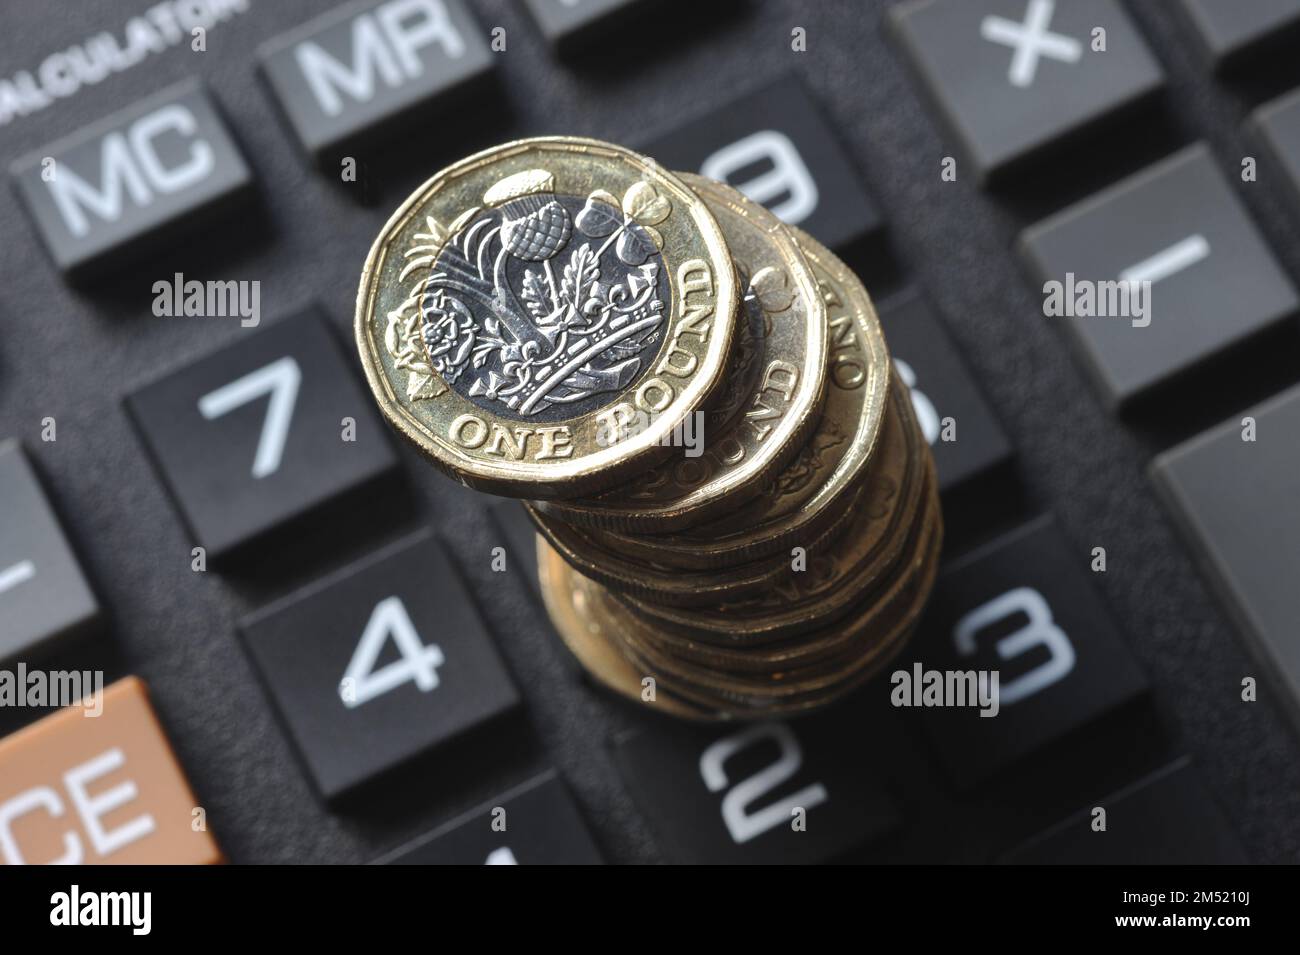 STACK OF ONE POUND COINS ON CALCULATOR RE COST OF LIVING CRISIS PENSIONS INCOME INFLATION HOUSEHOLD BUDGETS ETC UK Stock Photo